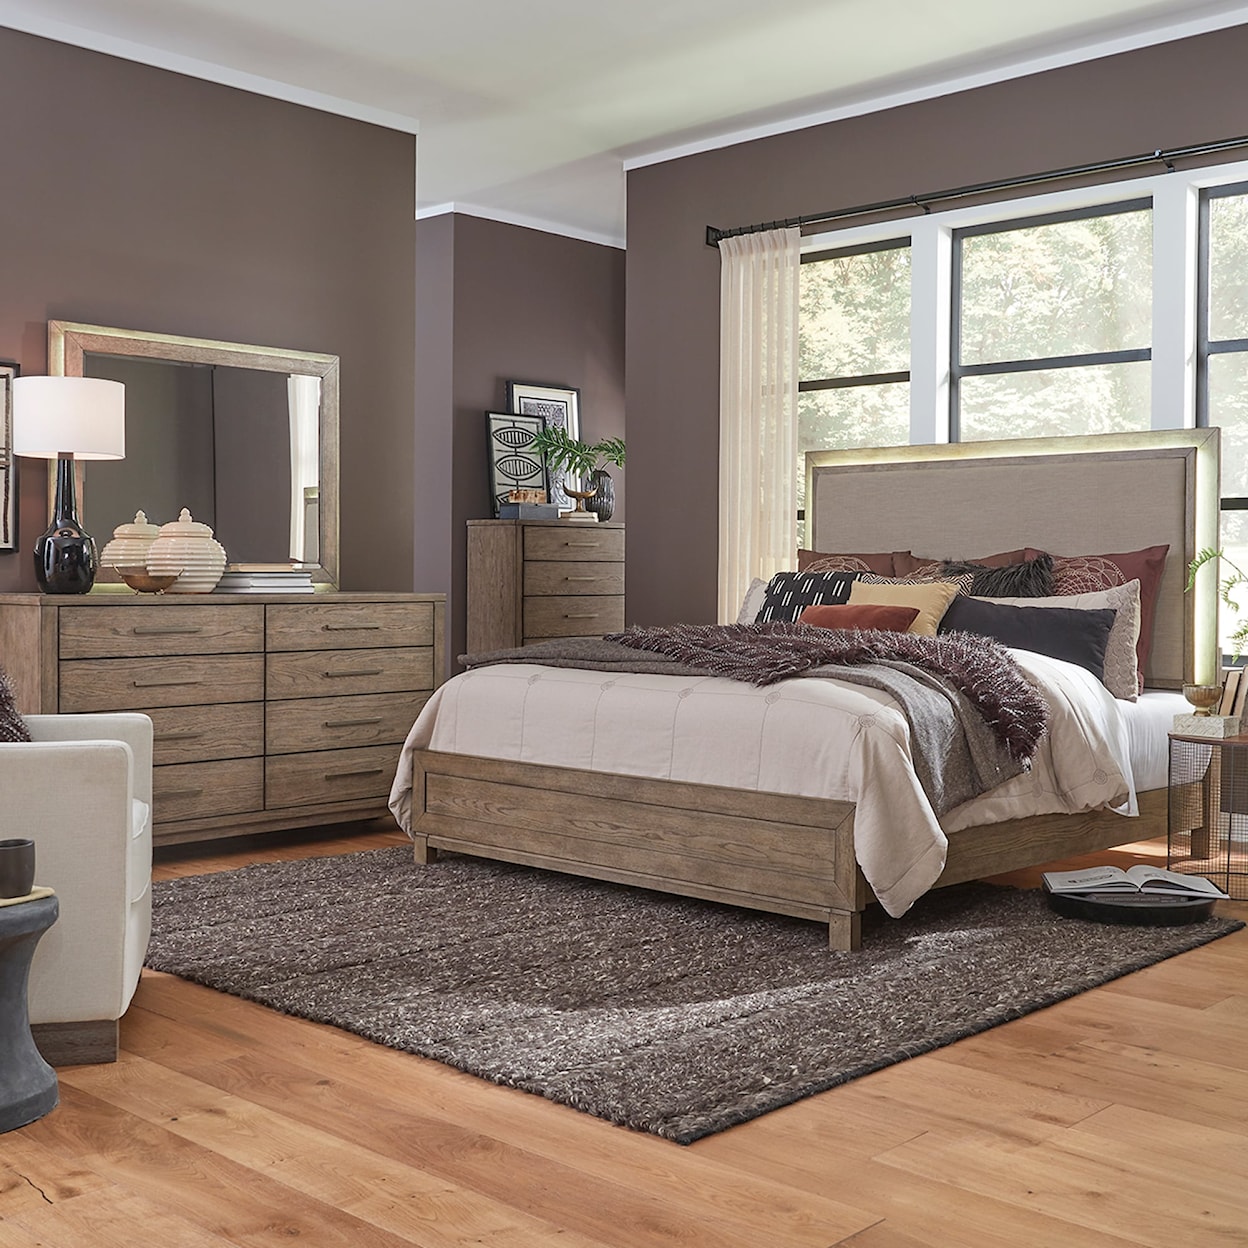 Liberty Furniture Canyon Road Queen Bedroom Group